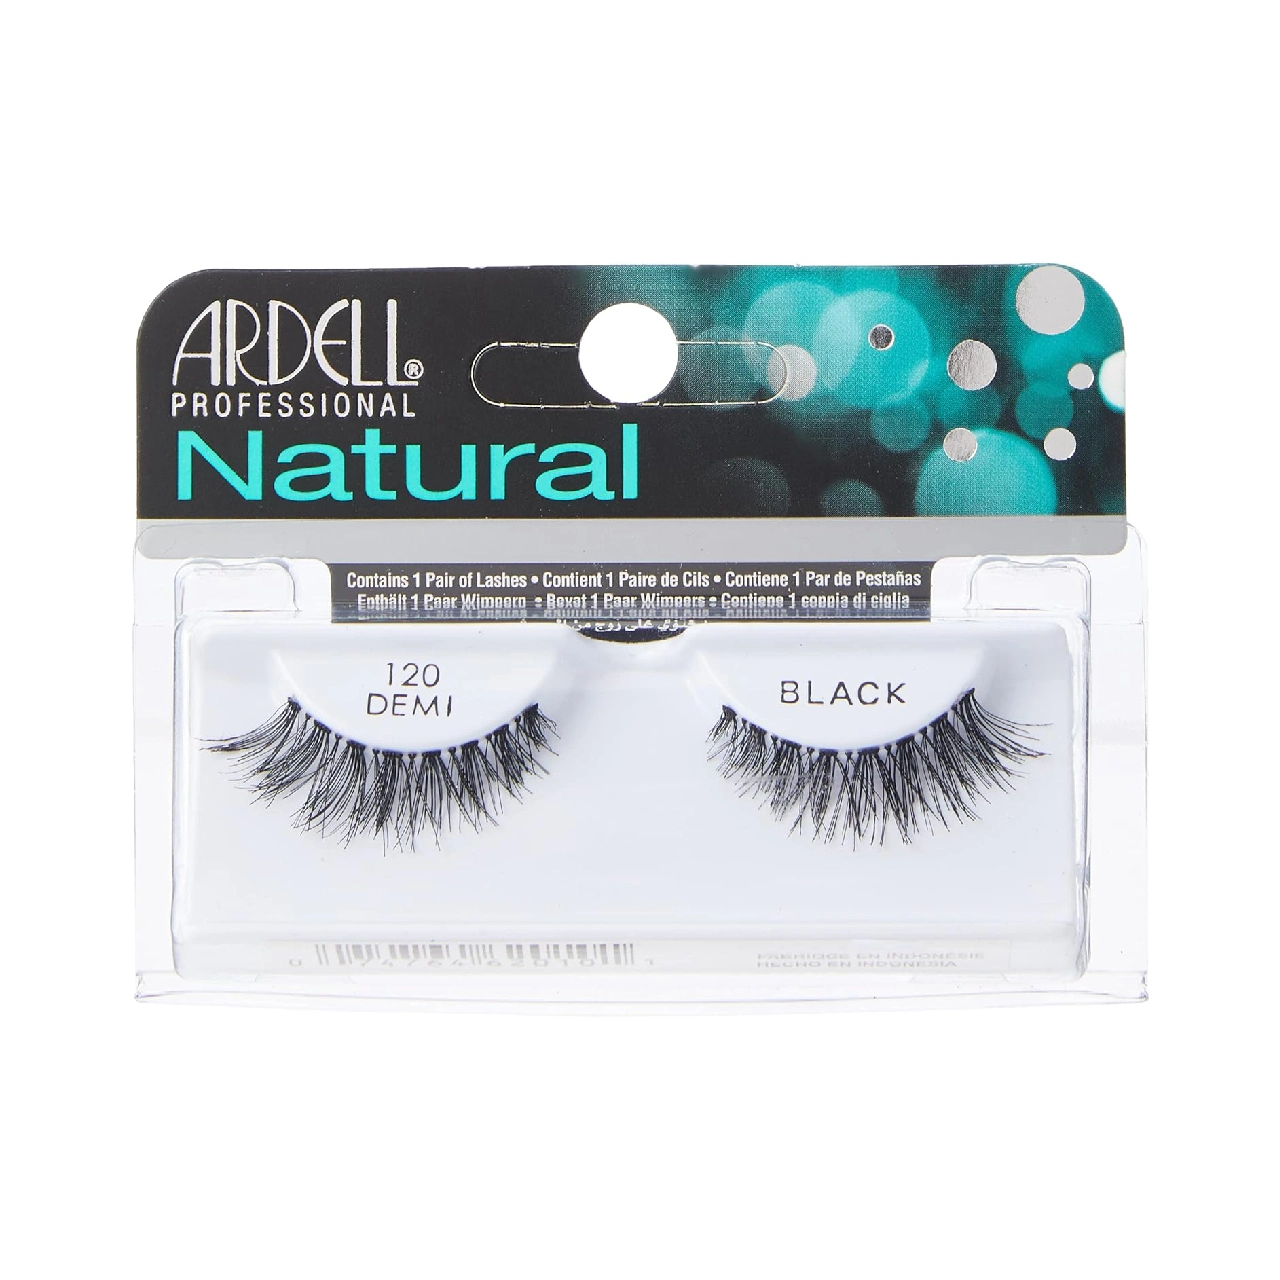 Ardell Natural Strip Eye Lashes displayed on a pure white background.